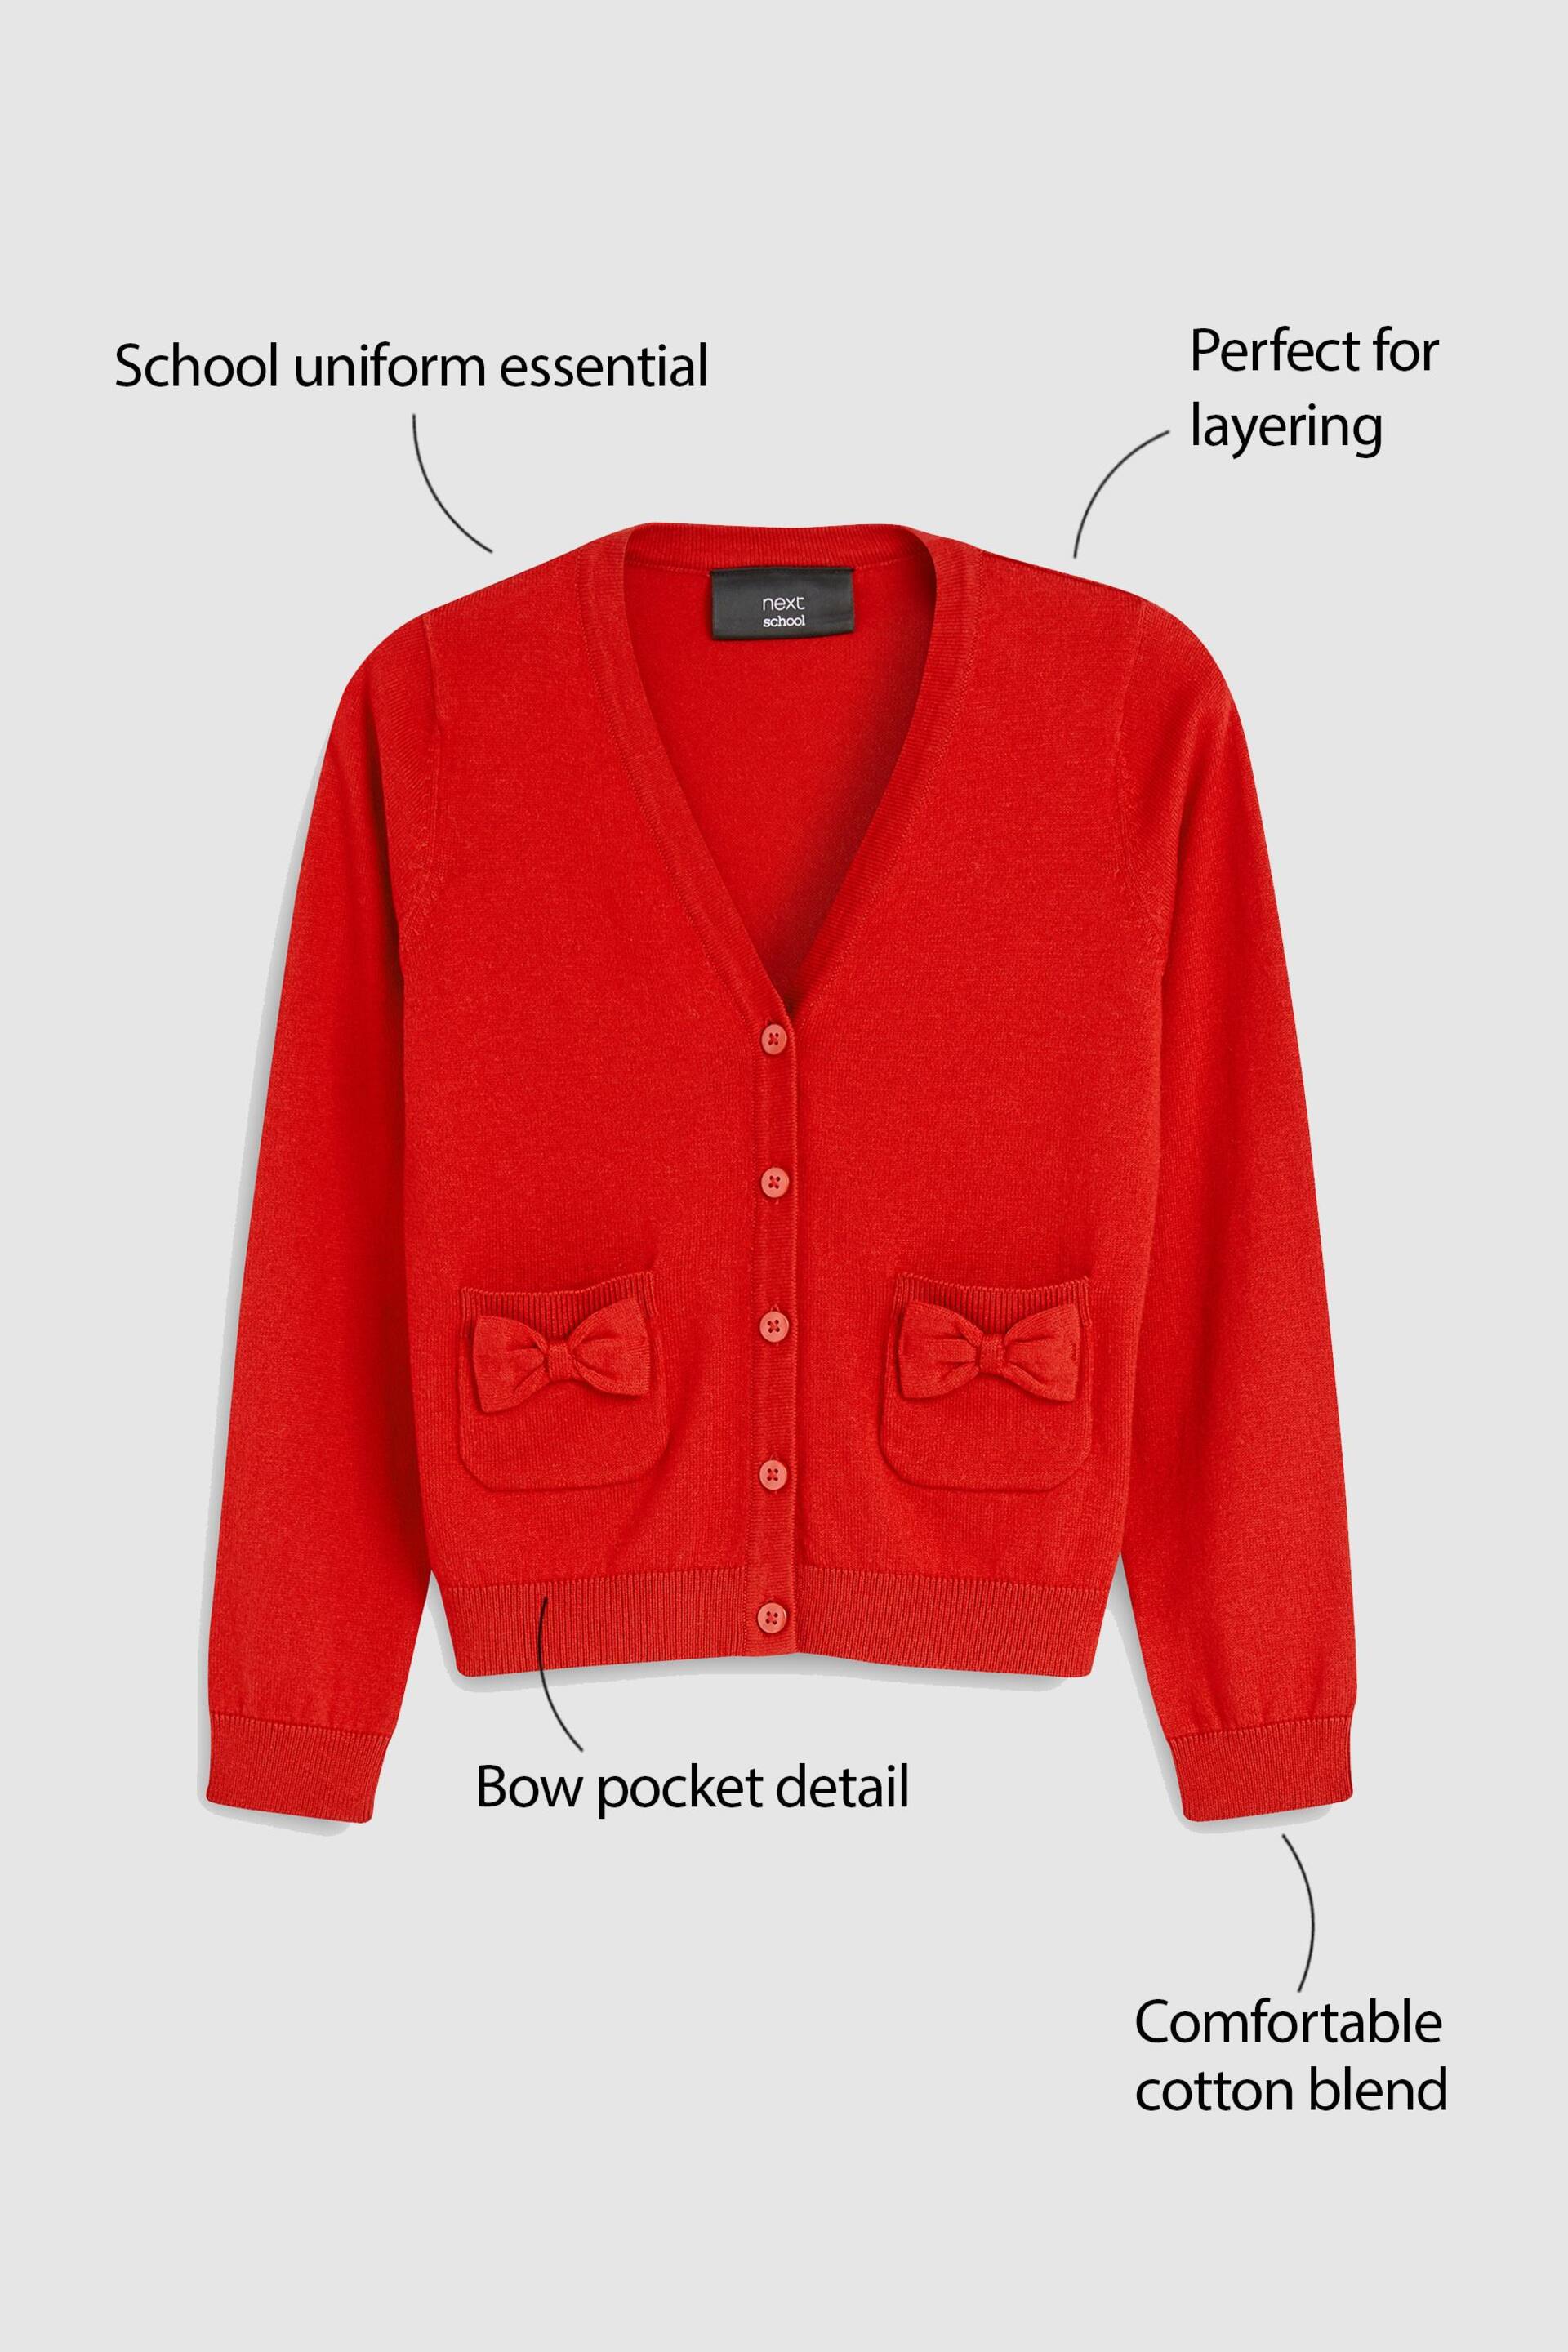 Red Cotton Rich Bow Pocket School Cardigan (3-16yrs) - Image 3 of 7